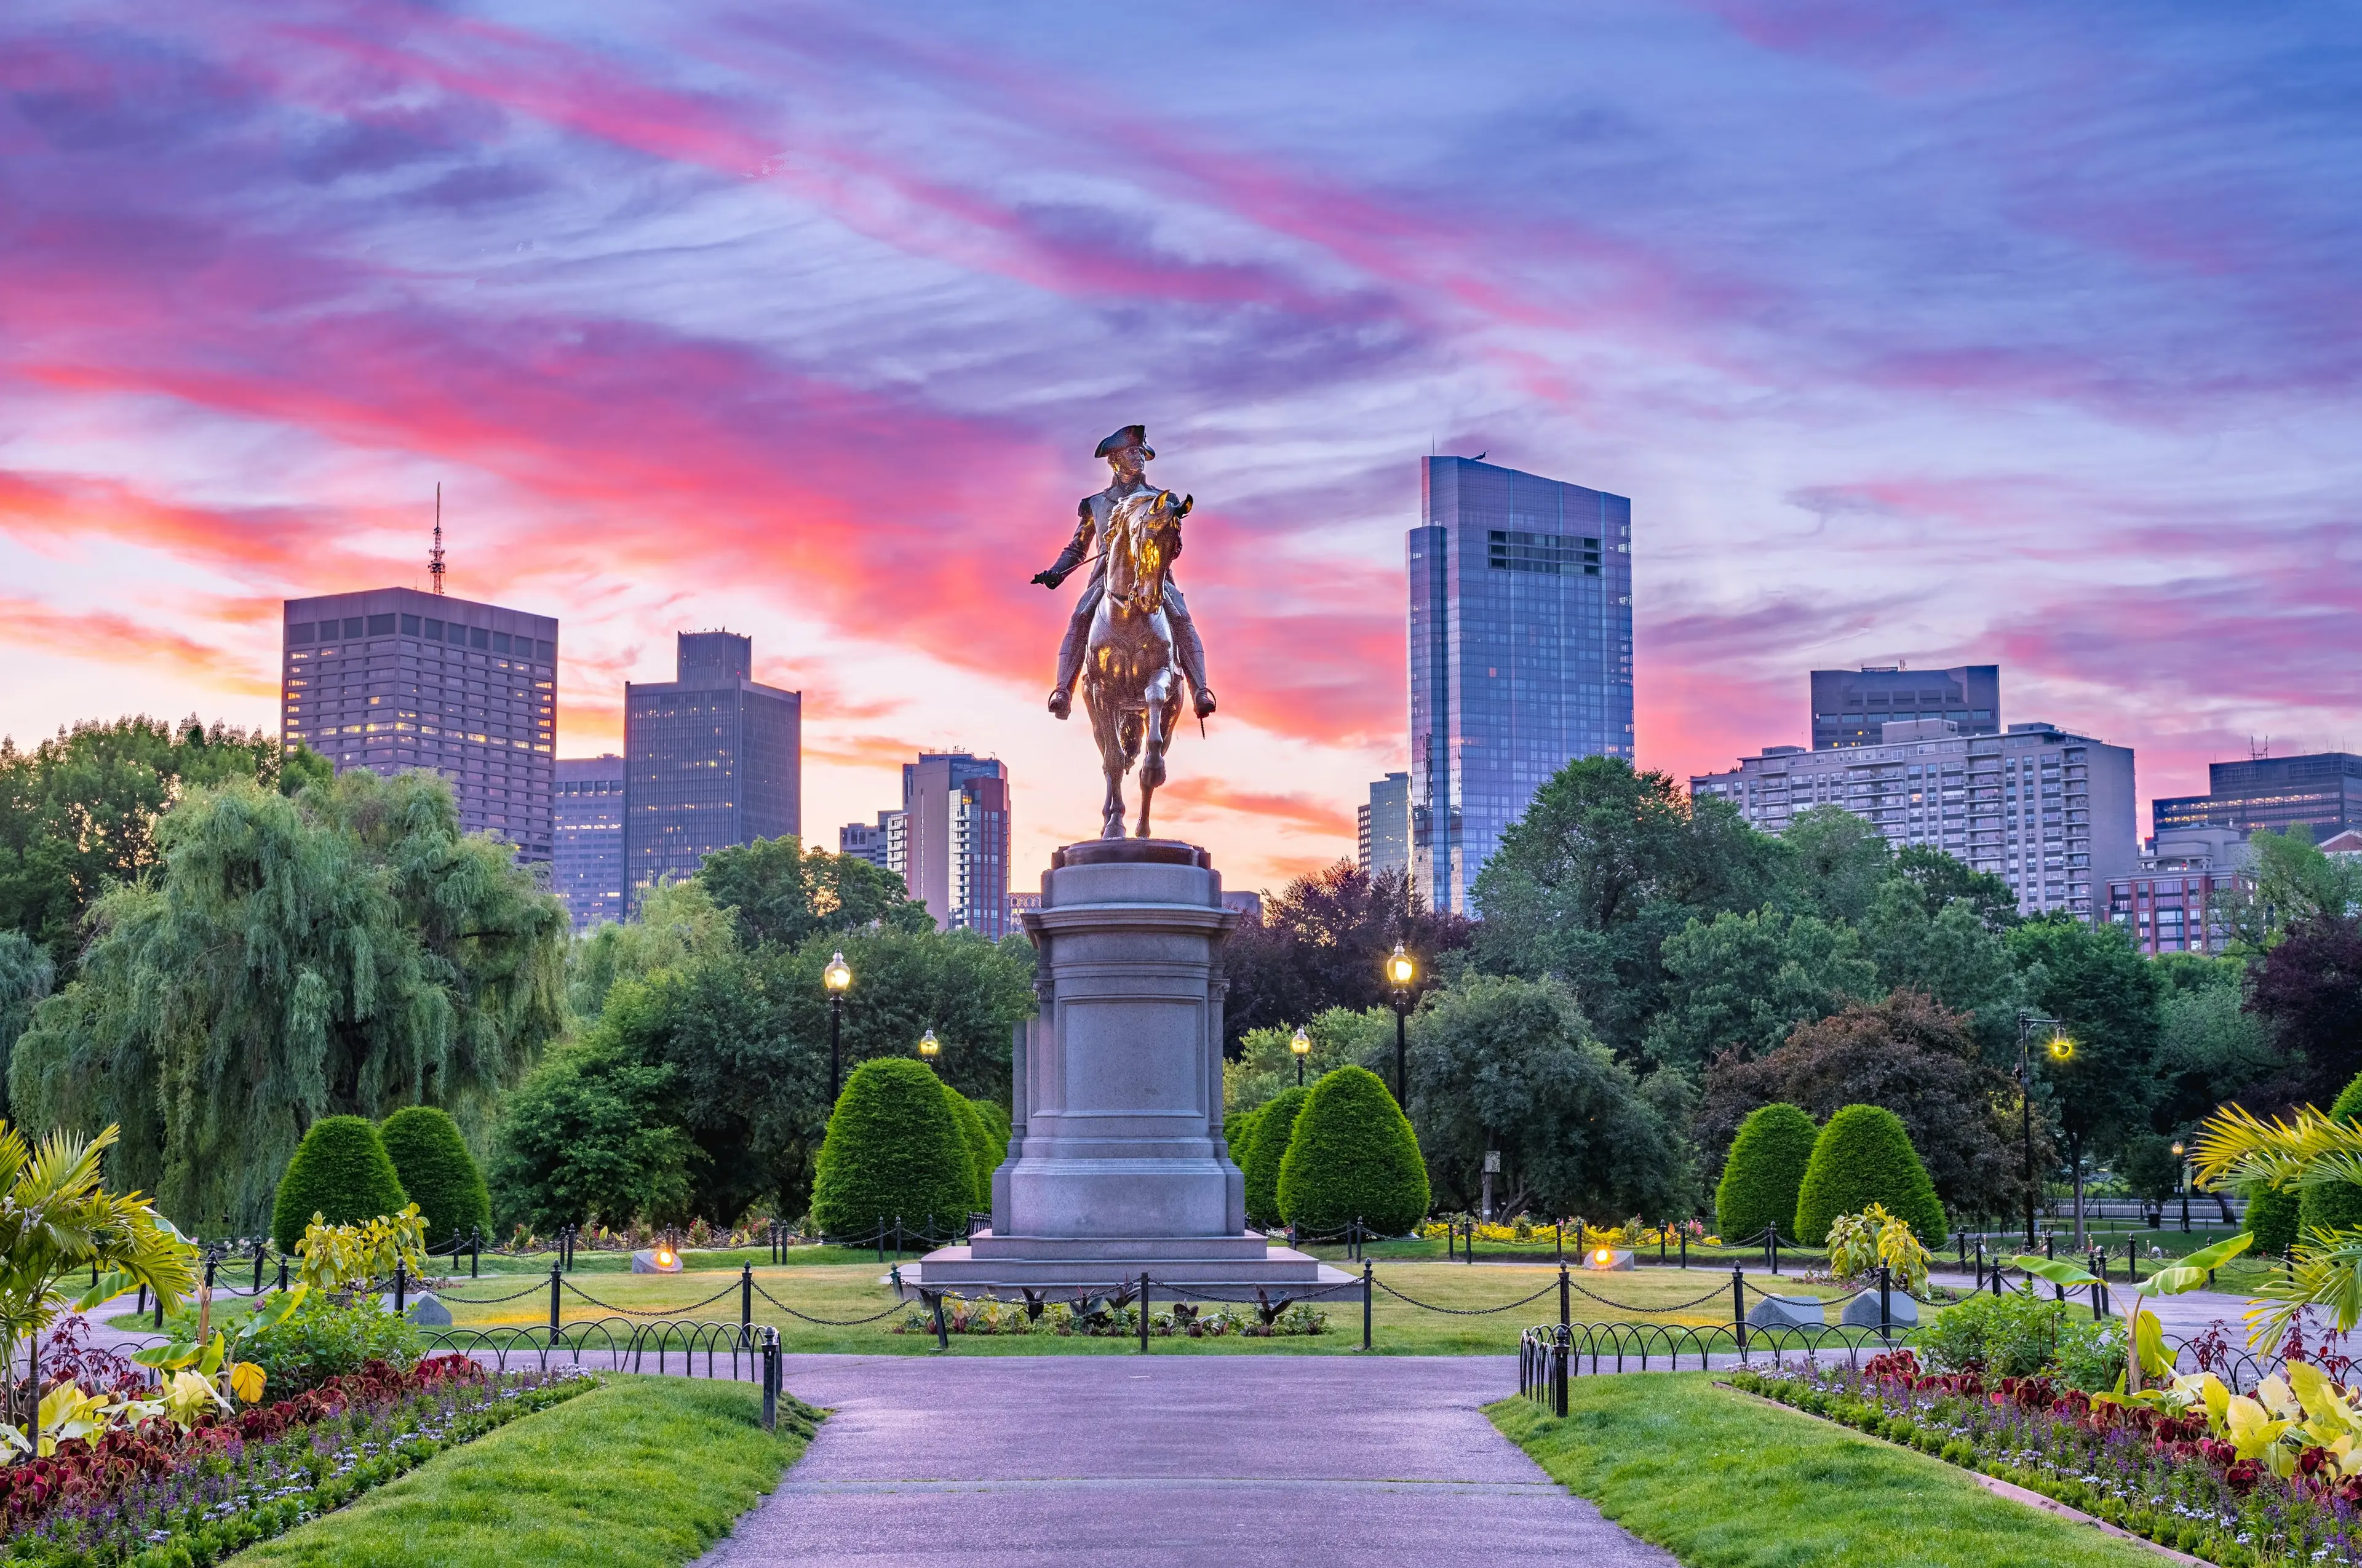 1-Day Boston Adventure: Sightseeing & Outdoor Fun with Friends